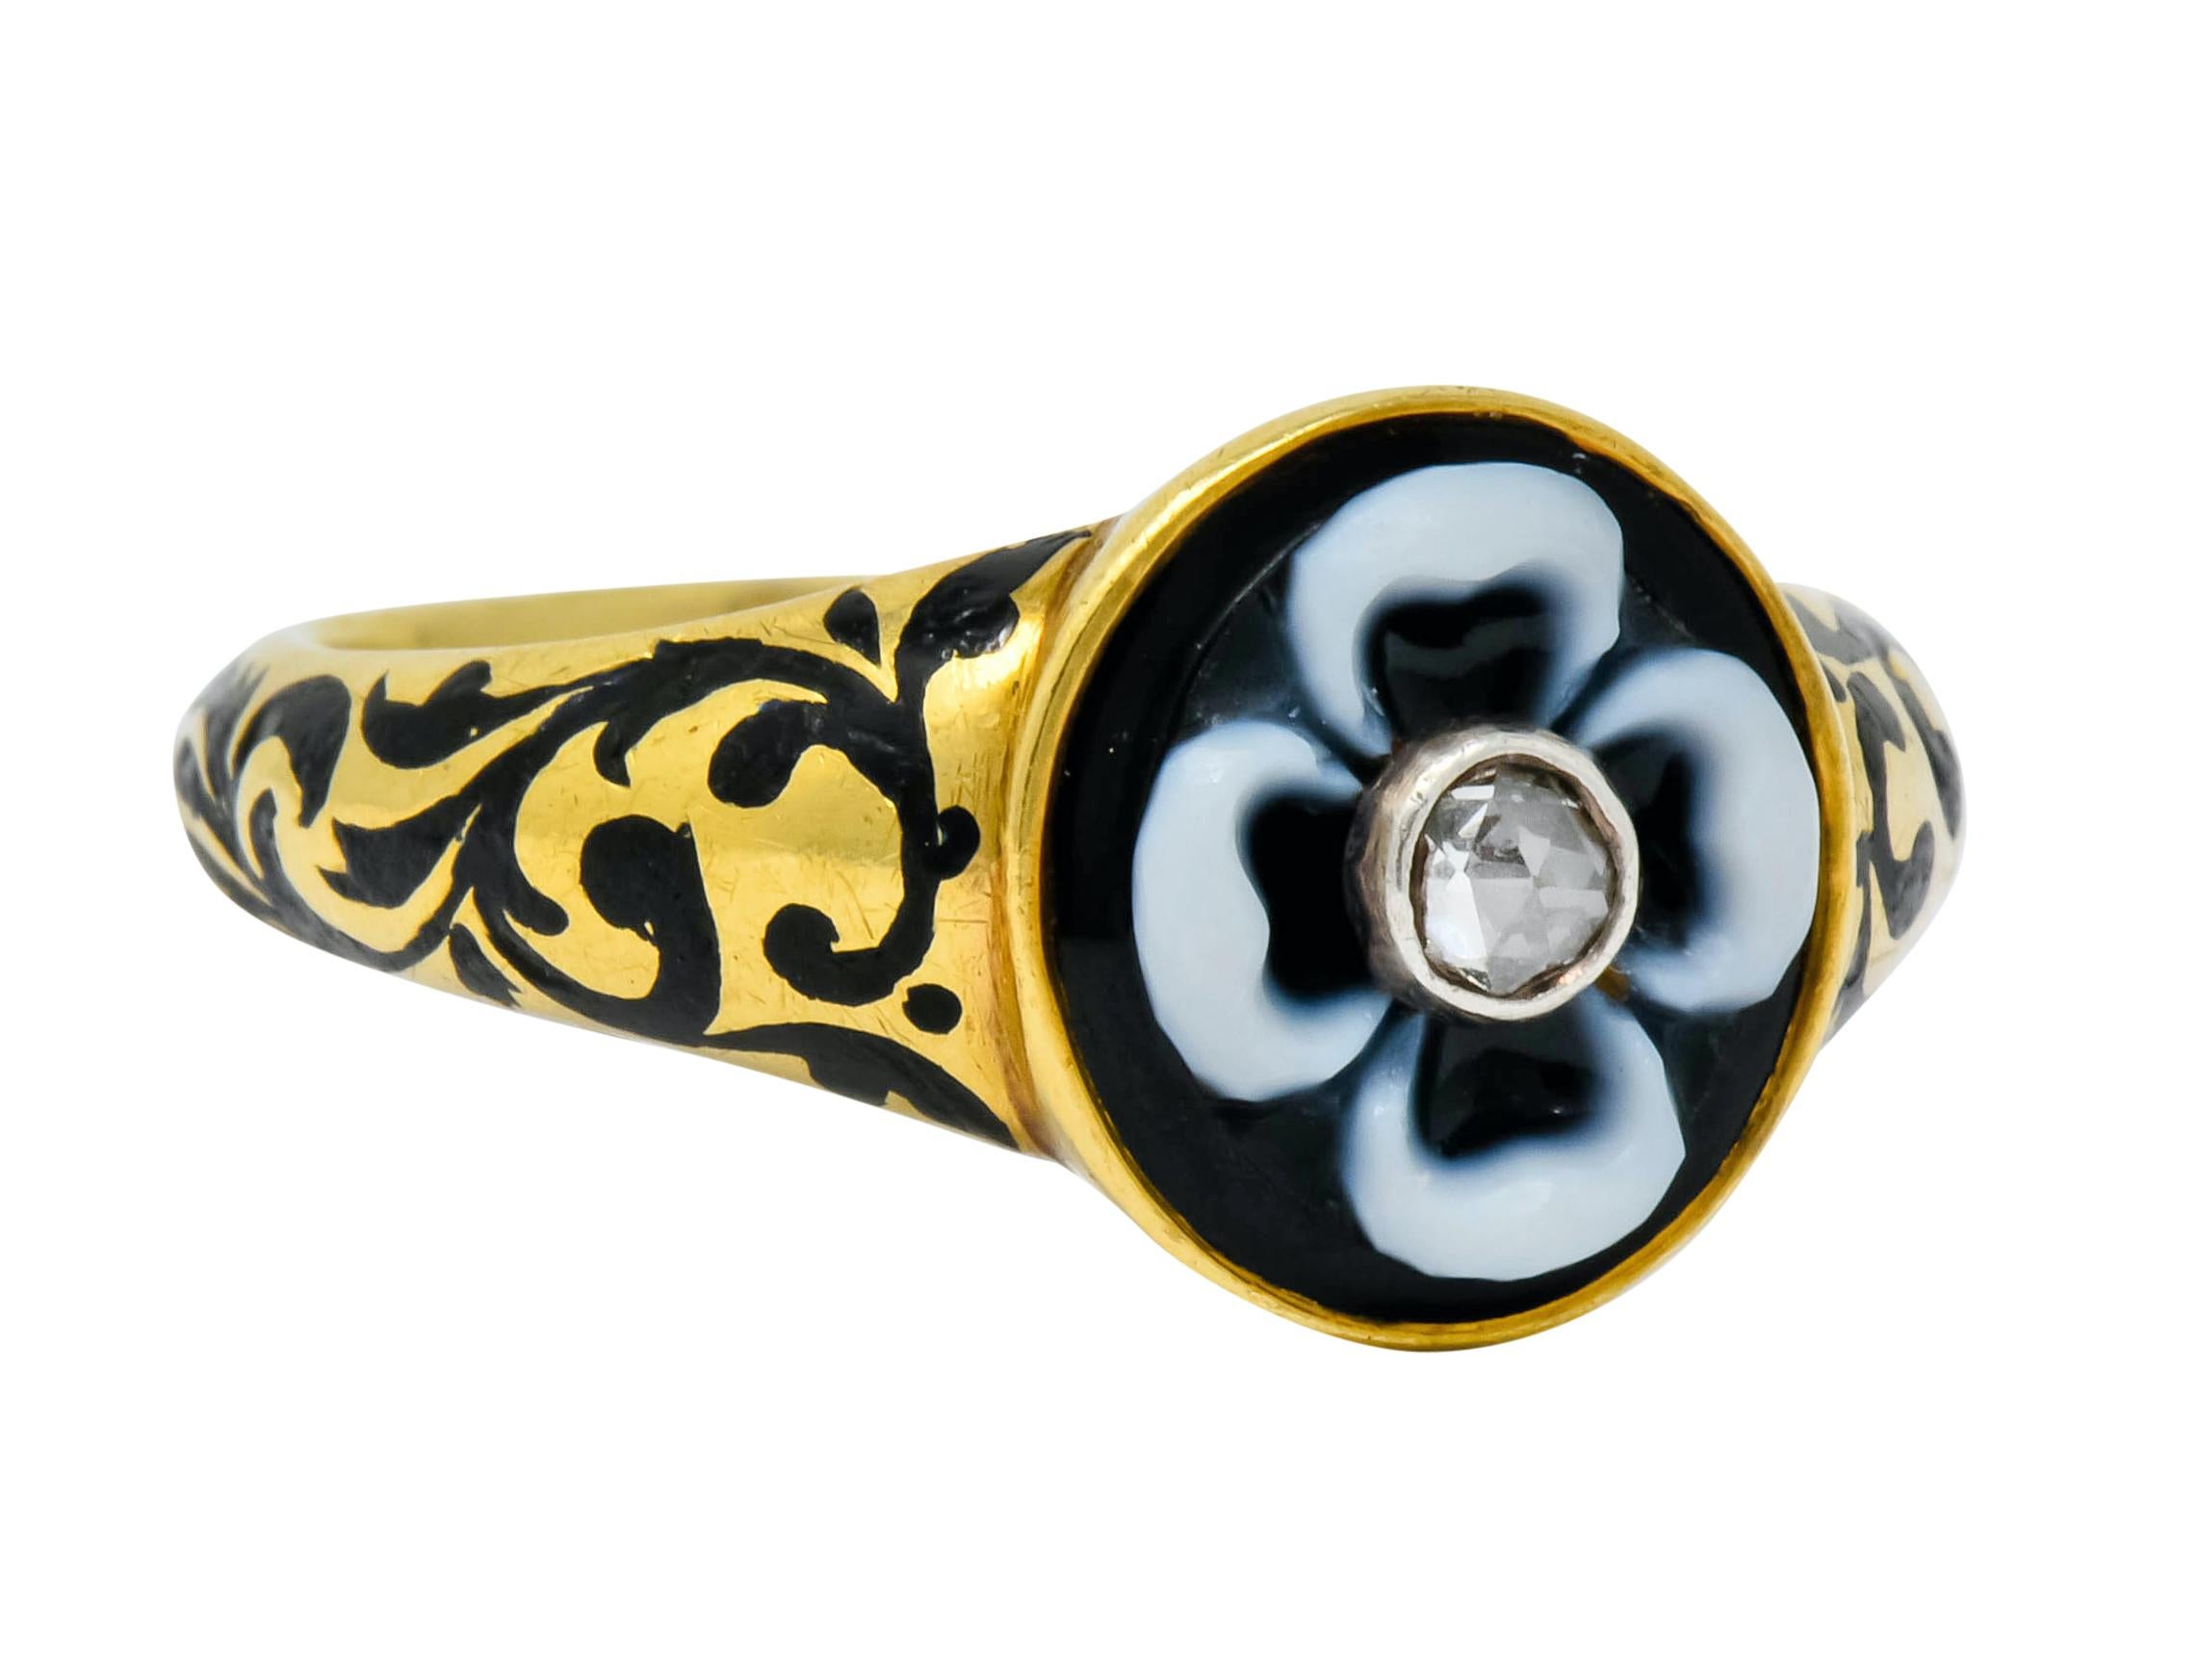 Centering a rose cut diamond, bezel set, in a carved onyx flower featuring white banding as its petals

Set in a matte gold mounting with scrolled enamel work fully around shank, black with some loss, consistent with age, wear, and use

With dated